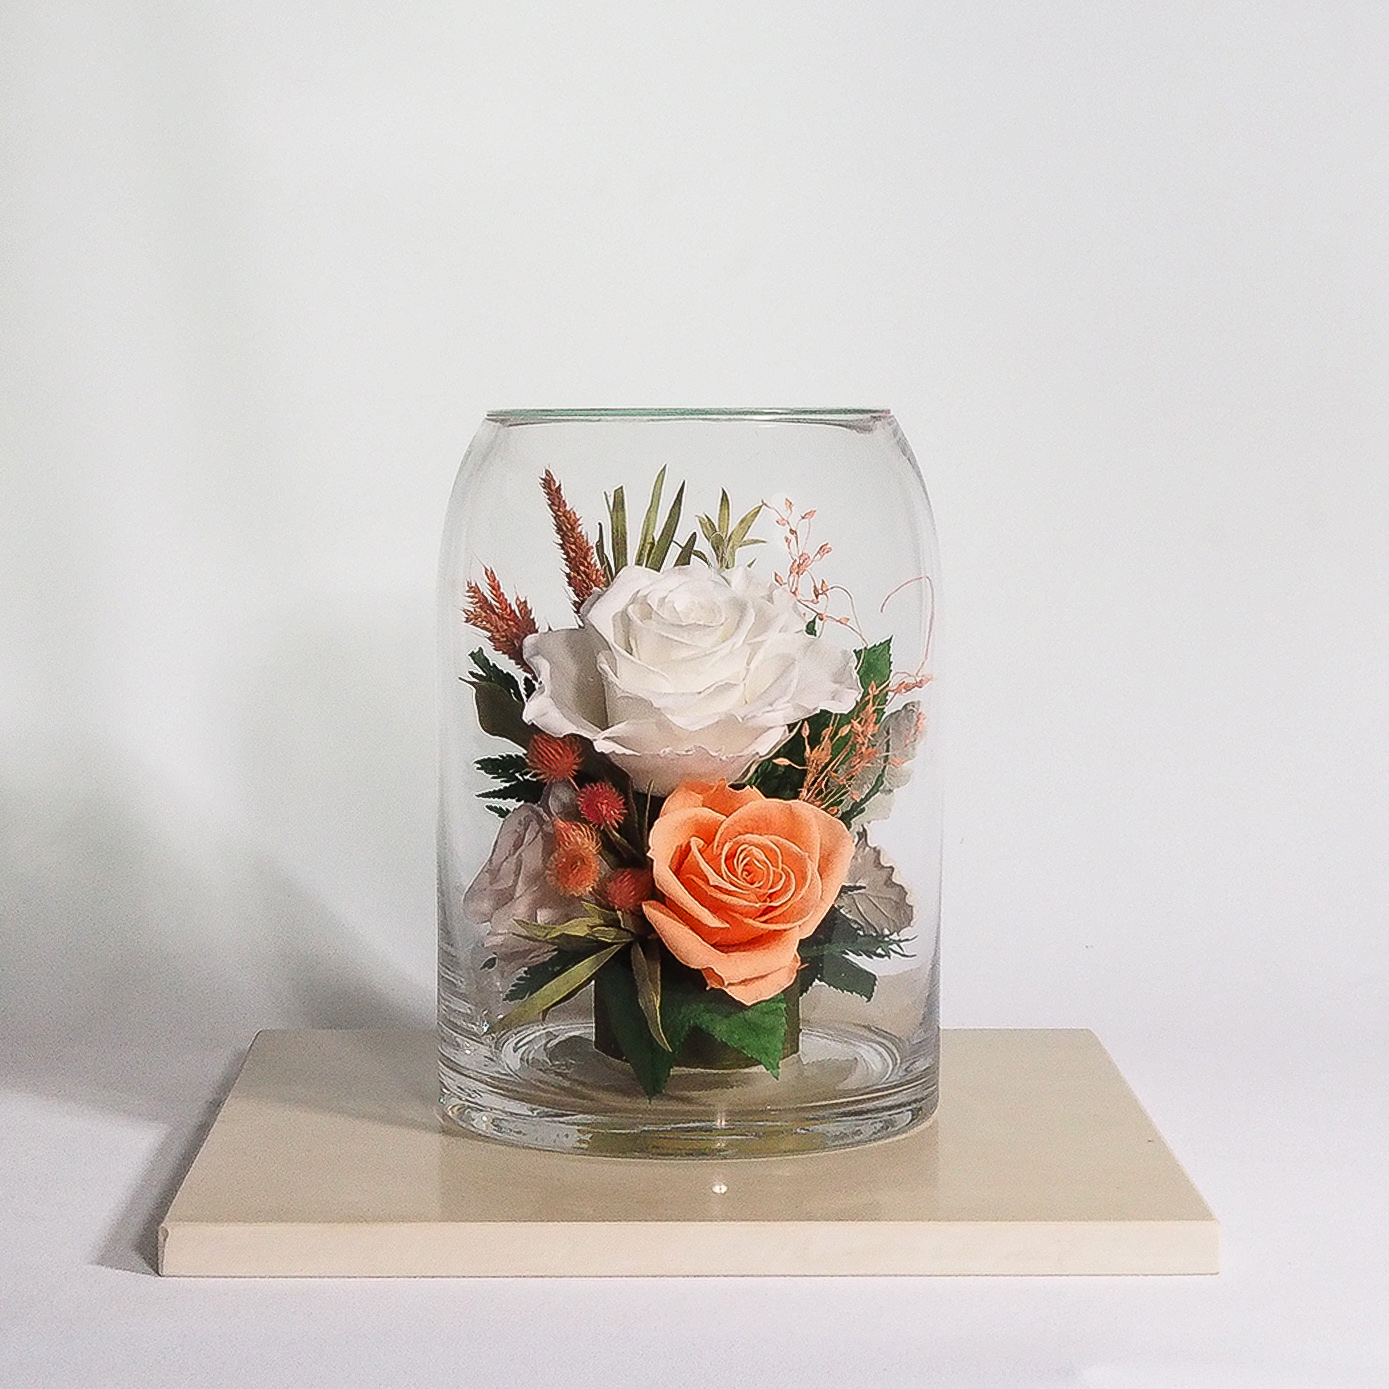 Preserved Flower Imported From Japan (Whitw-Peach-Pink Champagne)(67150). For Valentines, Gift, Home Decoration, Anniversary and present for your love ones. 100% natural flower.